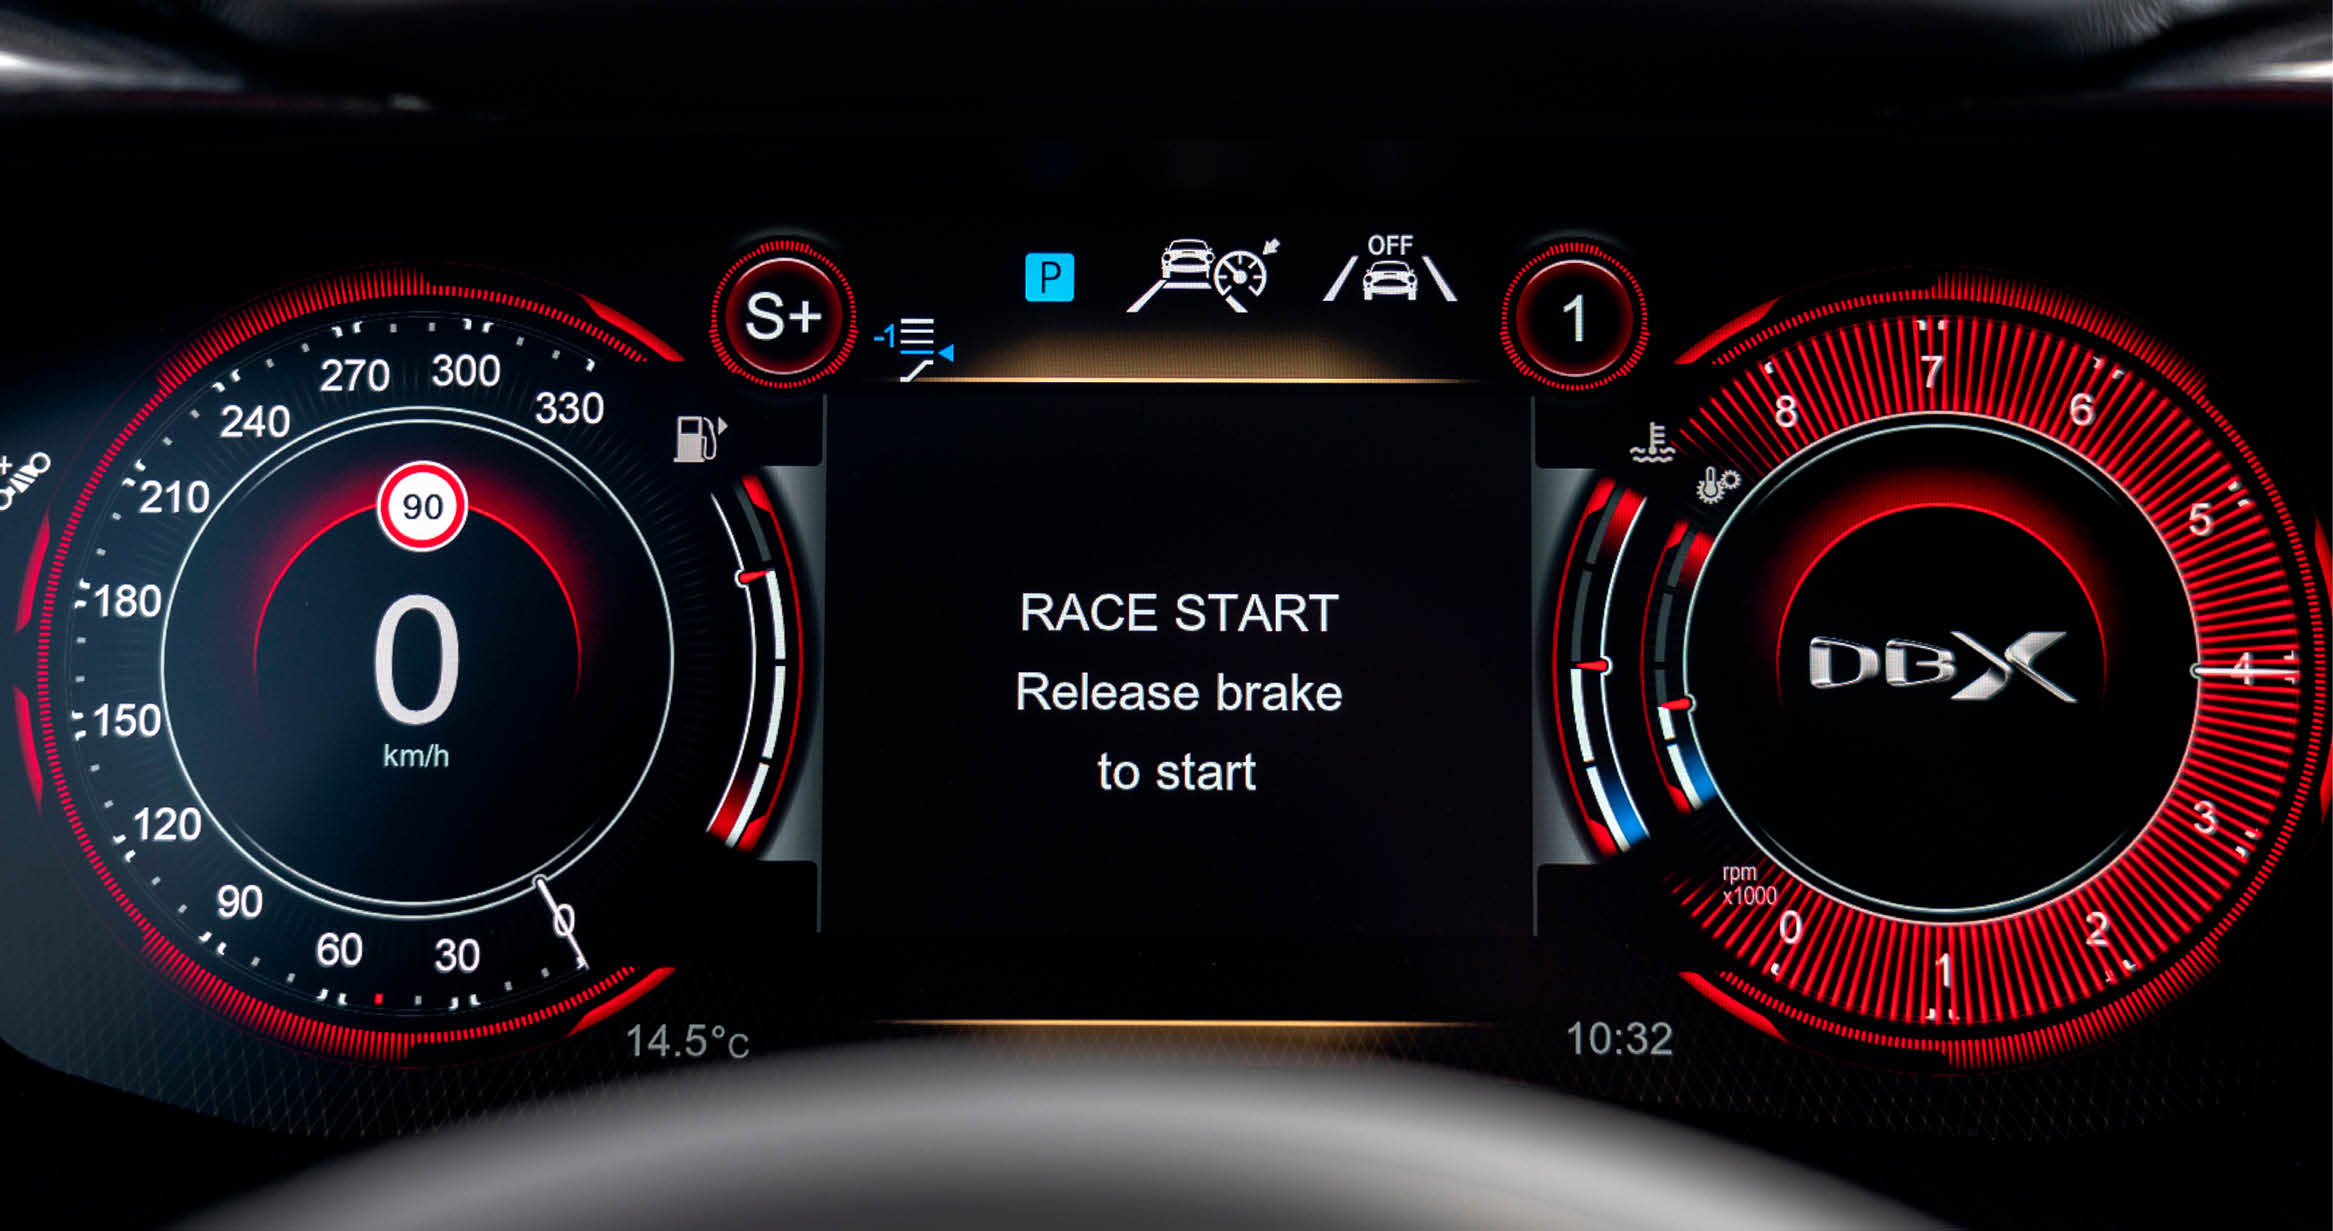 Instrument Cluster showing Launch Control and Sport+